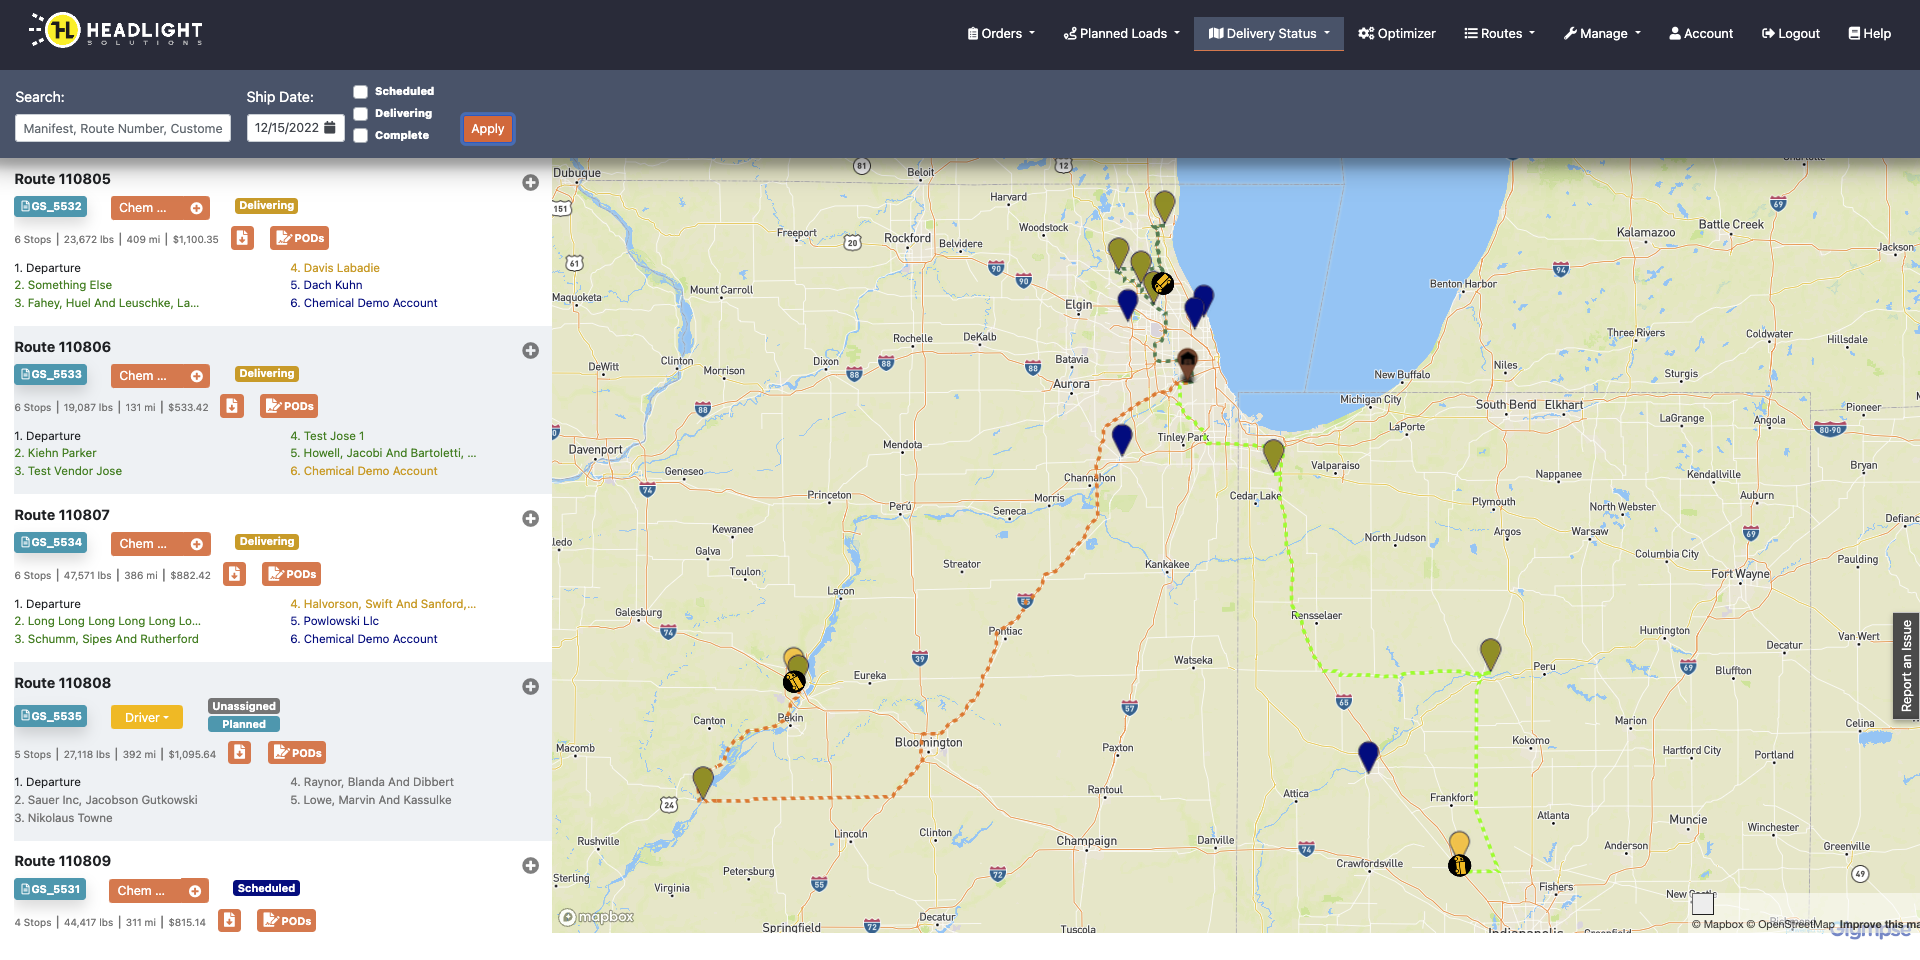 Headlight Solutions driver and delivery tracking